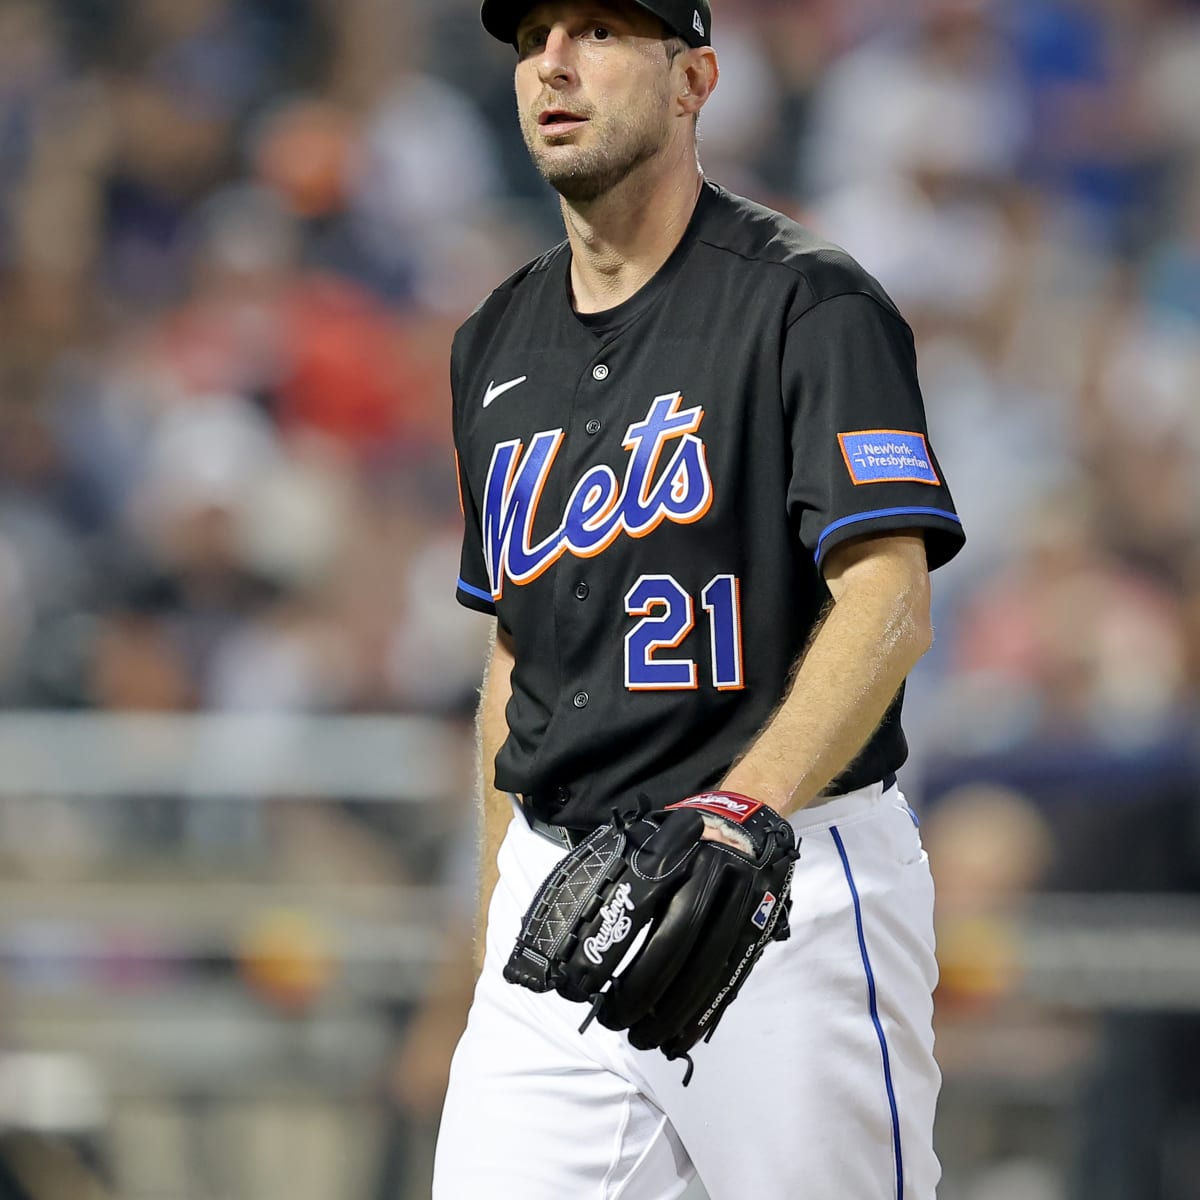 Max Scherzer: Texas Rangers and New York Mets trade: Max Scherzer now in  Rangers for shortstop prospect; Here are the details - The Economic Times